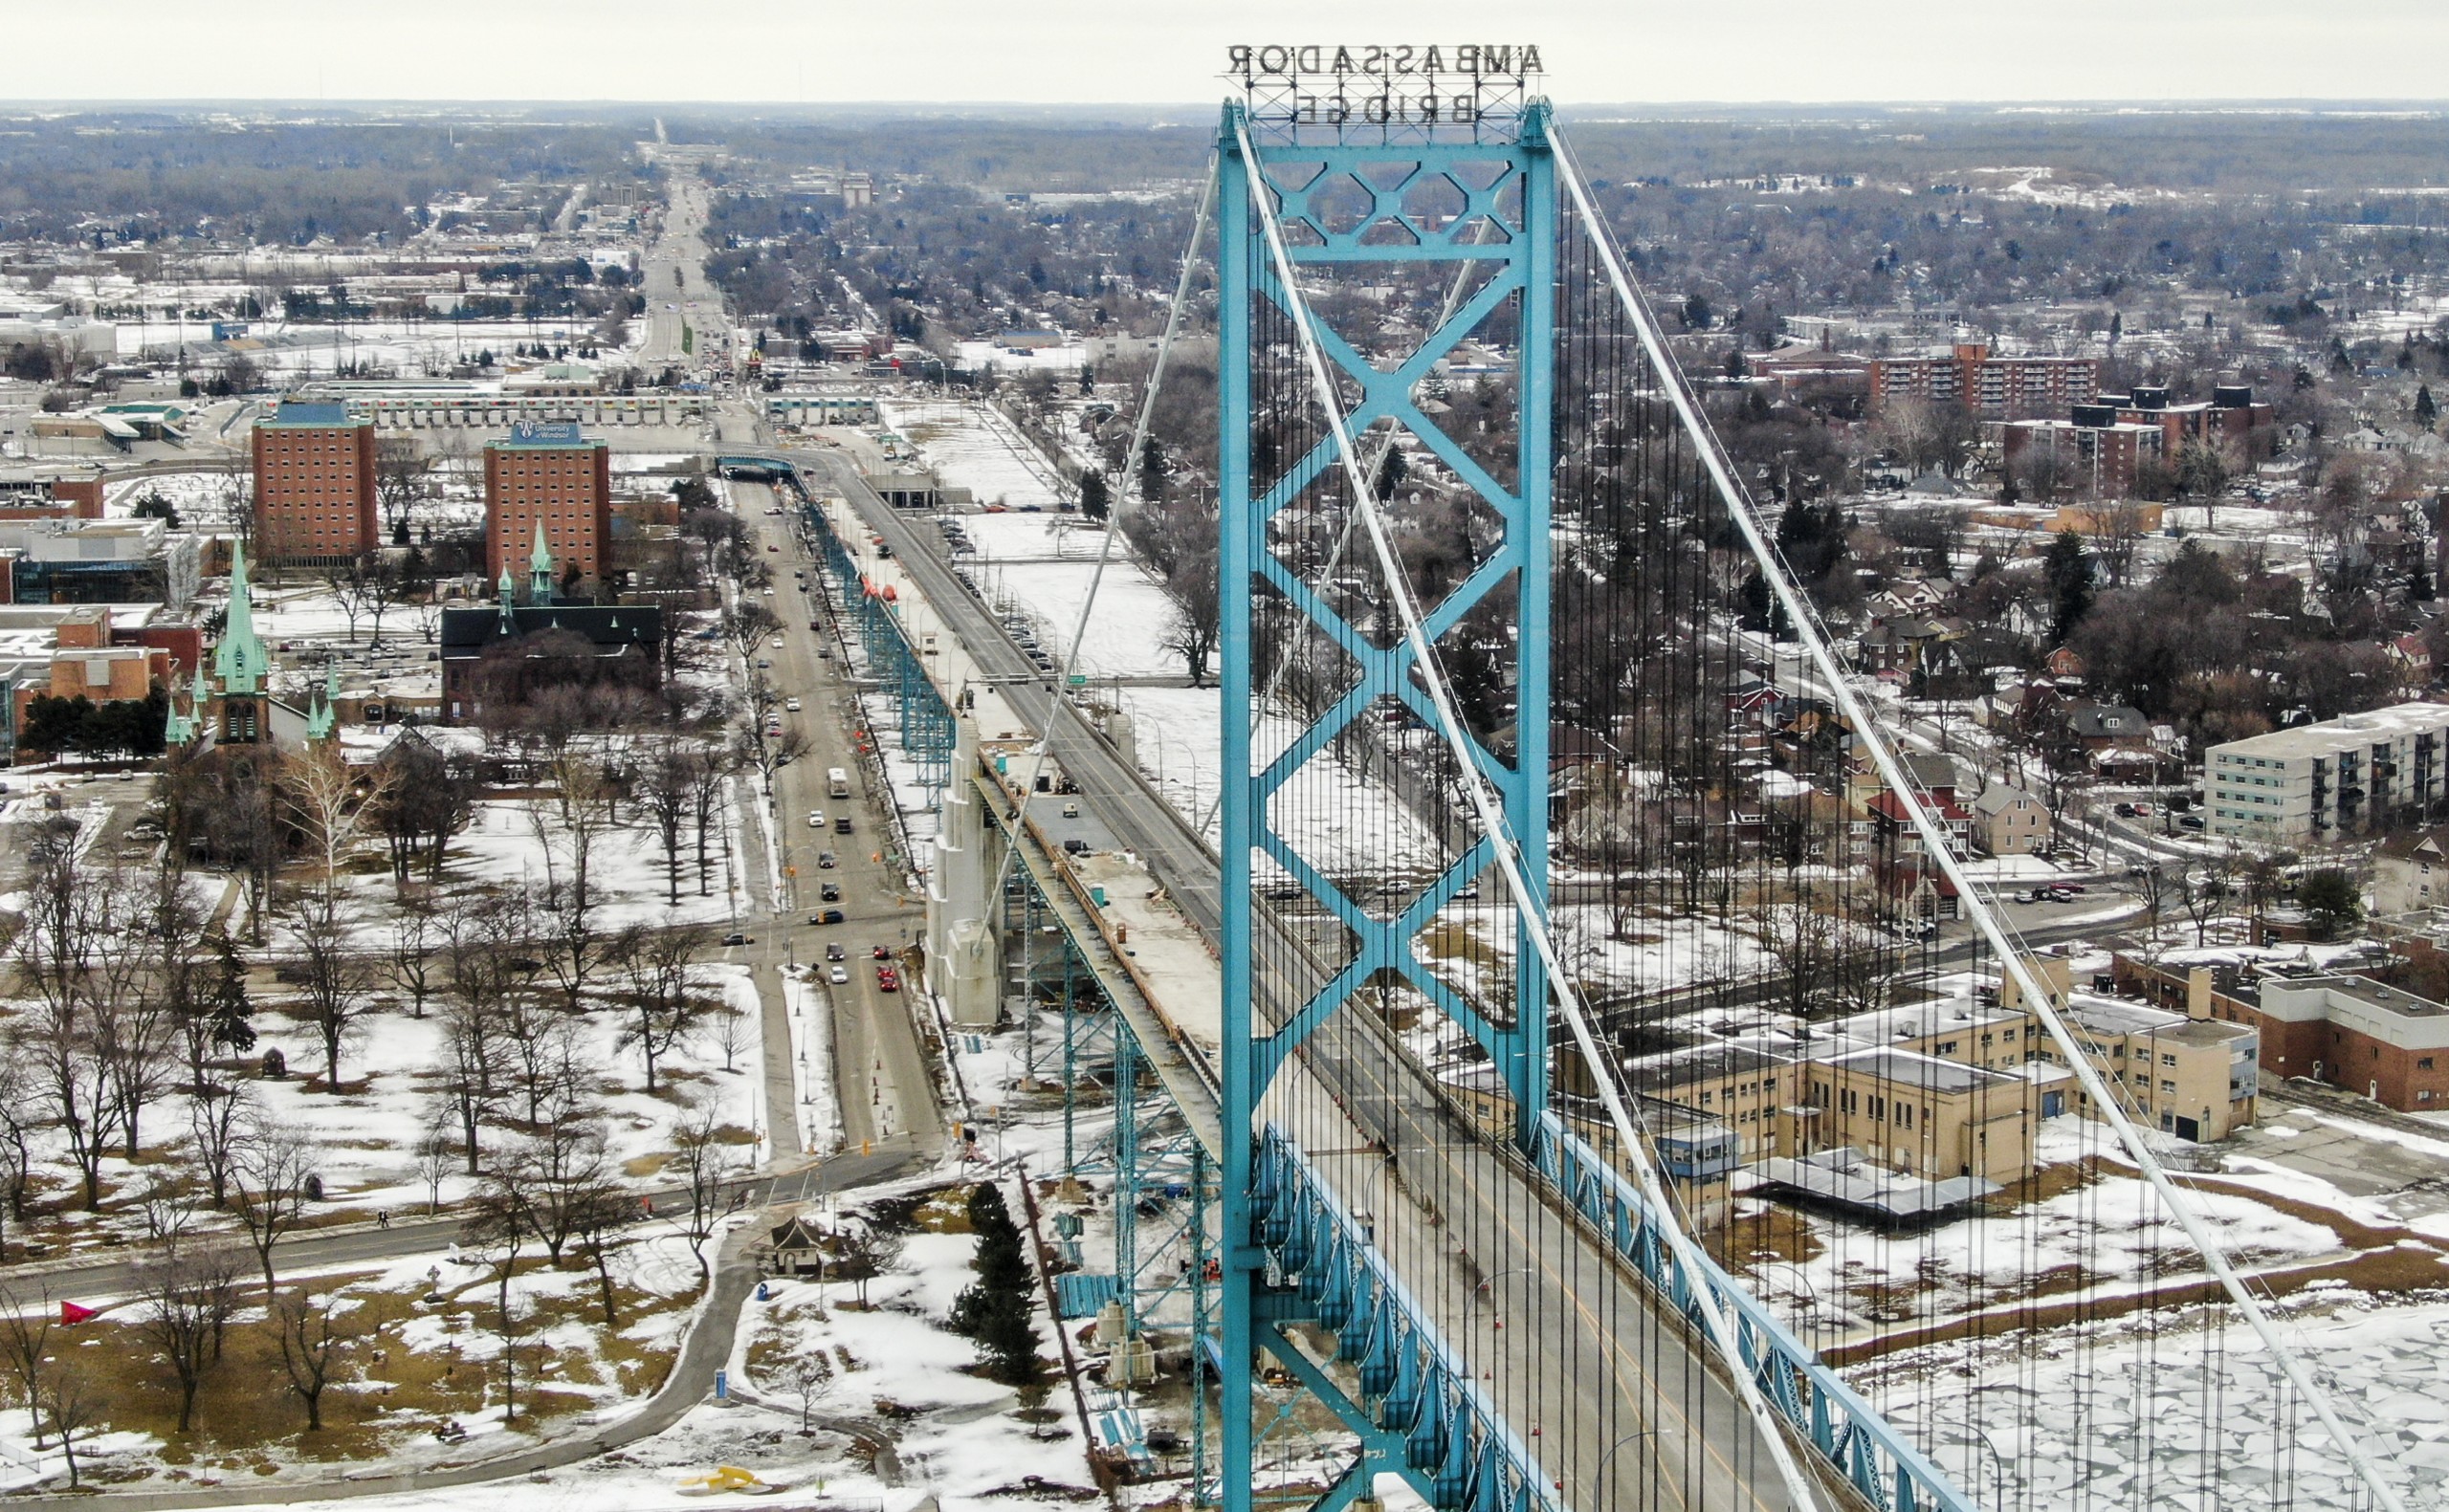 epa09745236 An aerial photo made with a drone looking towards Canada and Canadian Customs shows the closed Ambassador Bridge over the Detroit River that links the US and Canada between Windsor, Ontario, Canada and Detroit, Michigan, USA, 10 February 2022. The bridge, a vital link where 25 percent of goods between the two countries passes on an estimated 10,000 trucks each day, has been shut down by truckers protesting vaccine mandates in Canada.  EPA/TANNEN MAURY